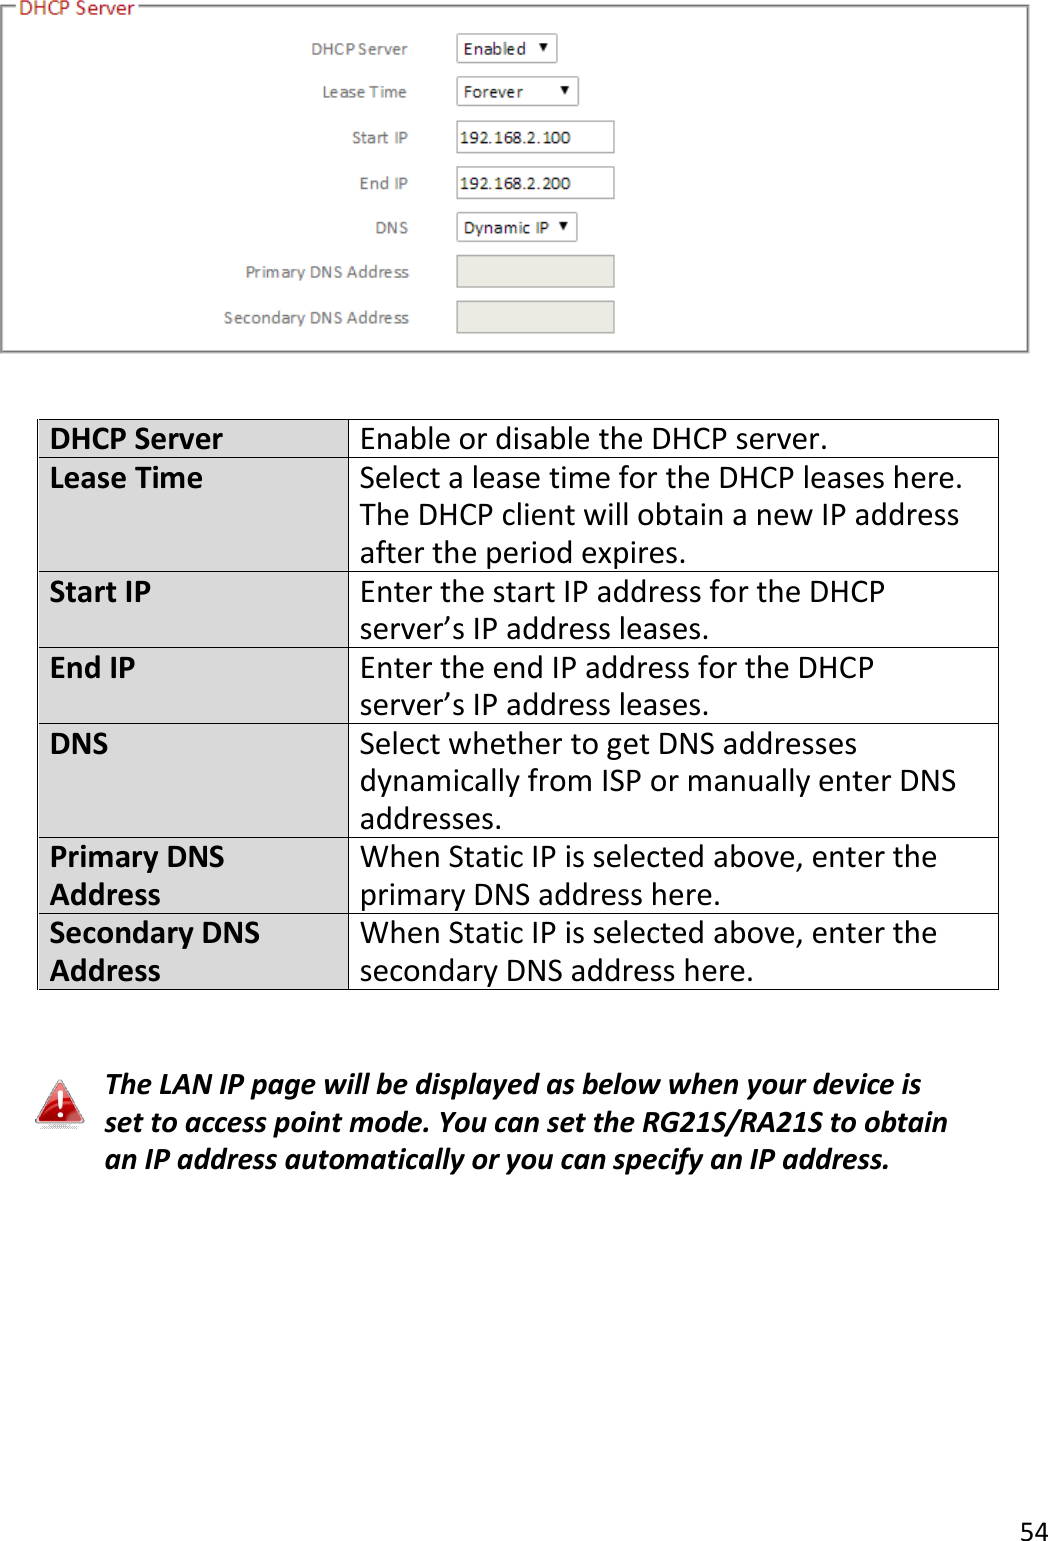 54    DHCP Server Enable or disable the DHCP server. Lease Time Select a lease time for the DHCP leases here. The DHCP client will obtain a new IP address after the period expires. Start IP Enter the start IP address for the DHCP server’s IP address leases. End IP Enter the end IP address for the DHCP server’s IP address leases. DNS Select whether to get DNS addresses dynamically from ISP or manually enter DNS addresses. Primary DNS Address When Static IP is selected above, enter the primary DNS address here. Secondary DNS Address When Static IP is selected above, enter the secondary DNS address here.   The LAN IP page will be displayed as below when your device is set to access point mode. You can set the RG21S/RA21S to obtain an IP address automatically or you can specify an IP address.  